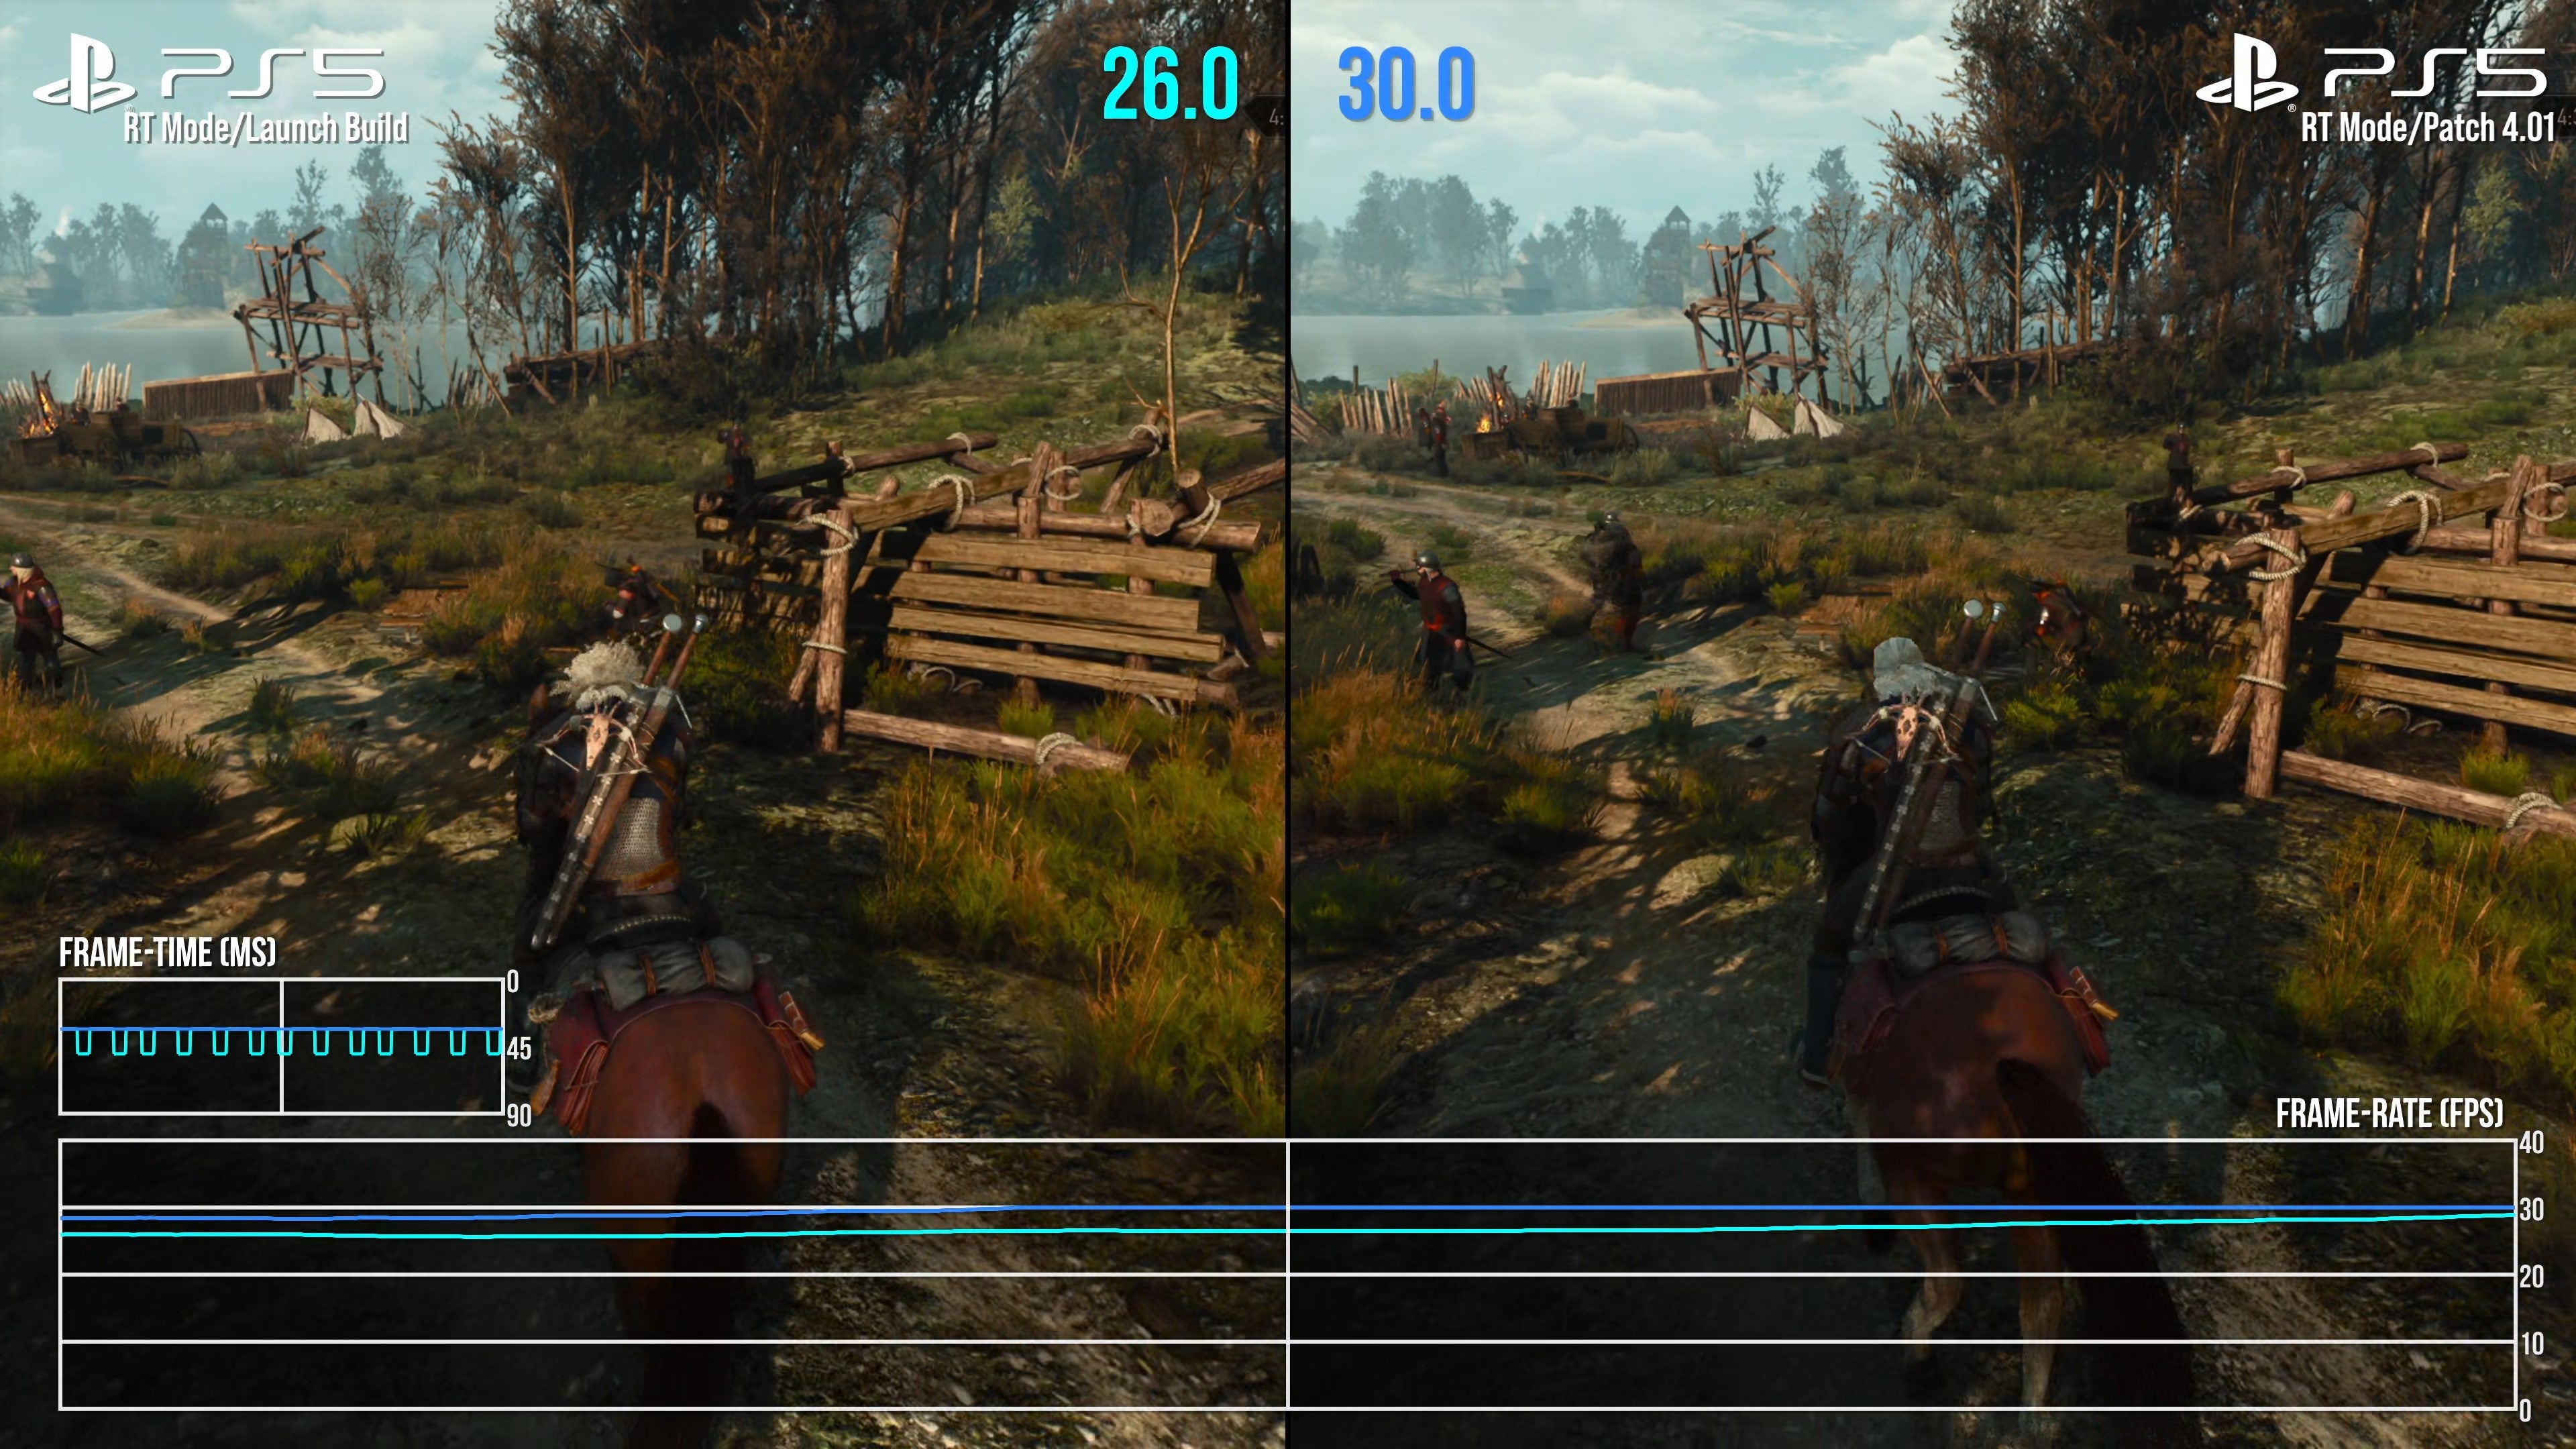 Image for Bonus Material: The Witcher 3 PS5 Ray Tracing Mode Patch 4.01 Test